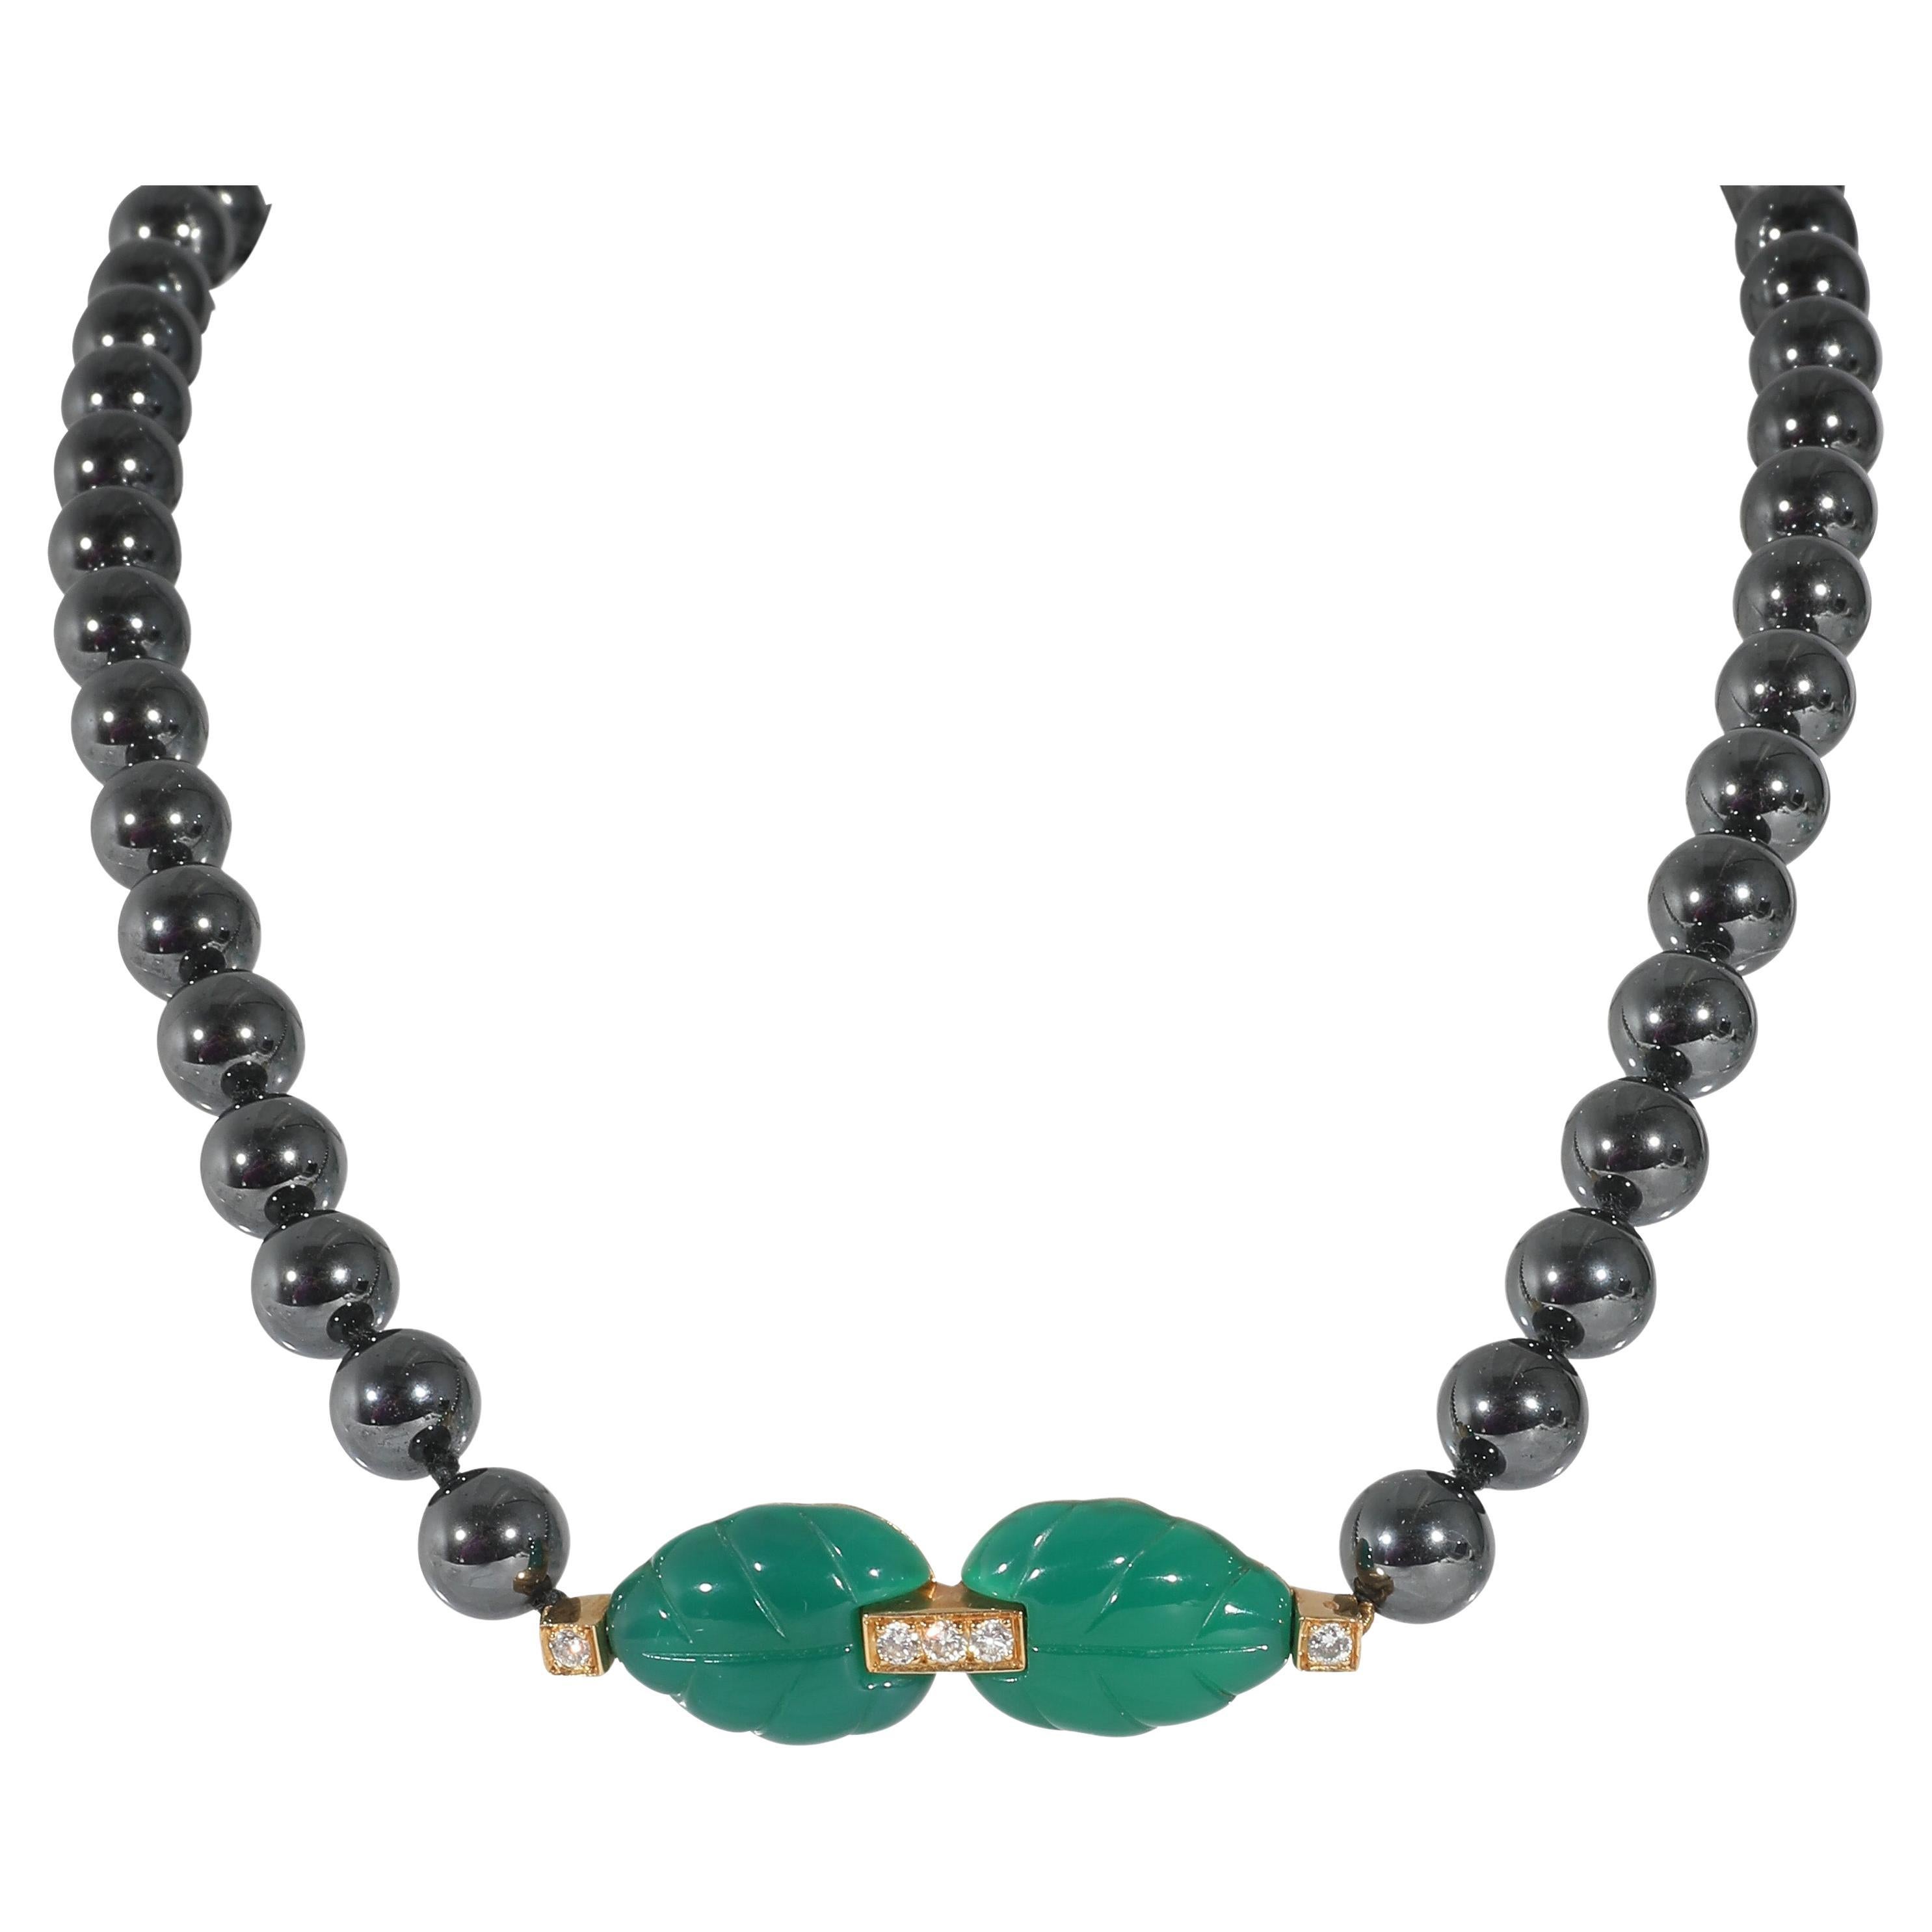 Cartier Patiala Hematite Beads & Diamond Necklace in 18K Yellow Gold 0.15 CTWW For Sale